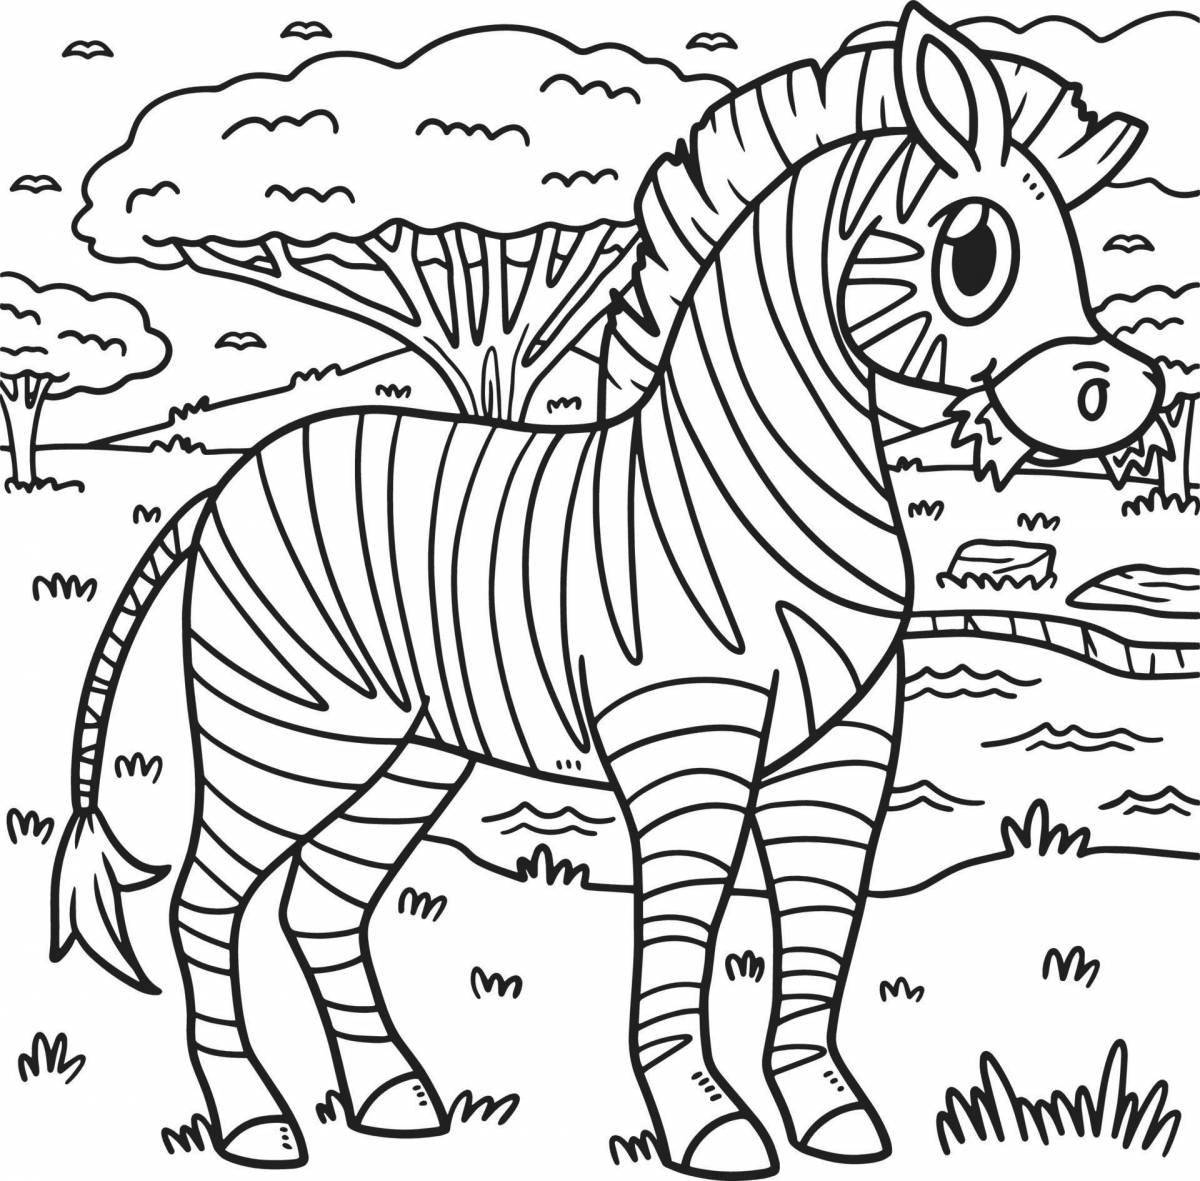 Fun zebra coloring book for 3-4 year olds